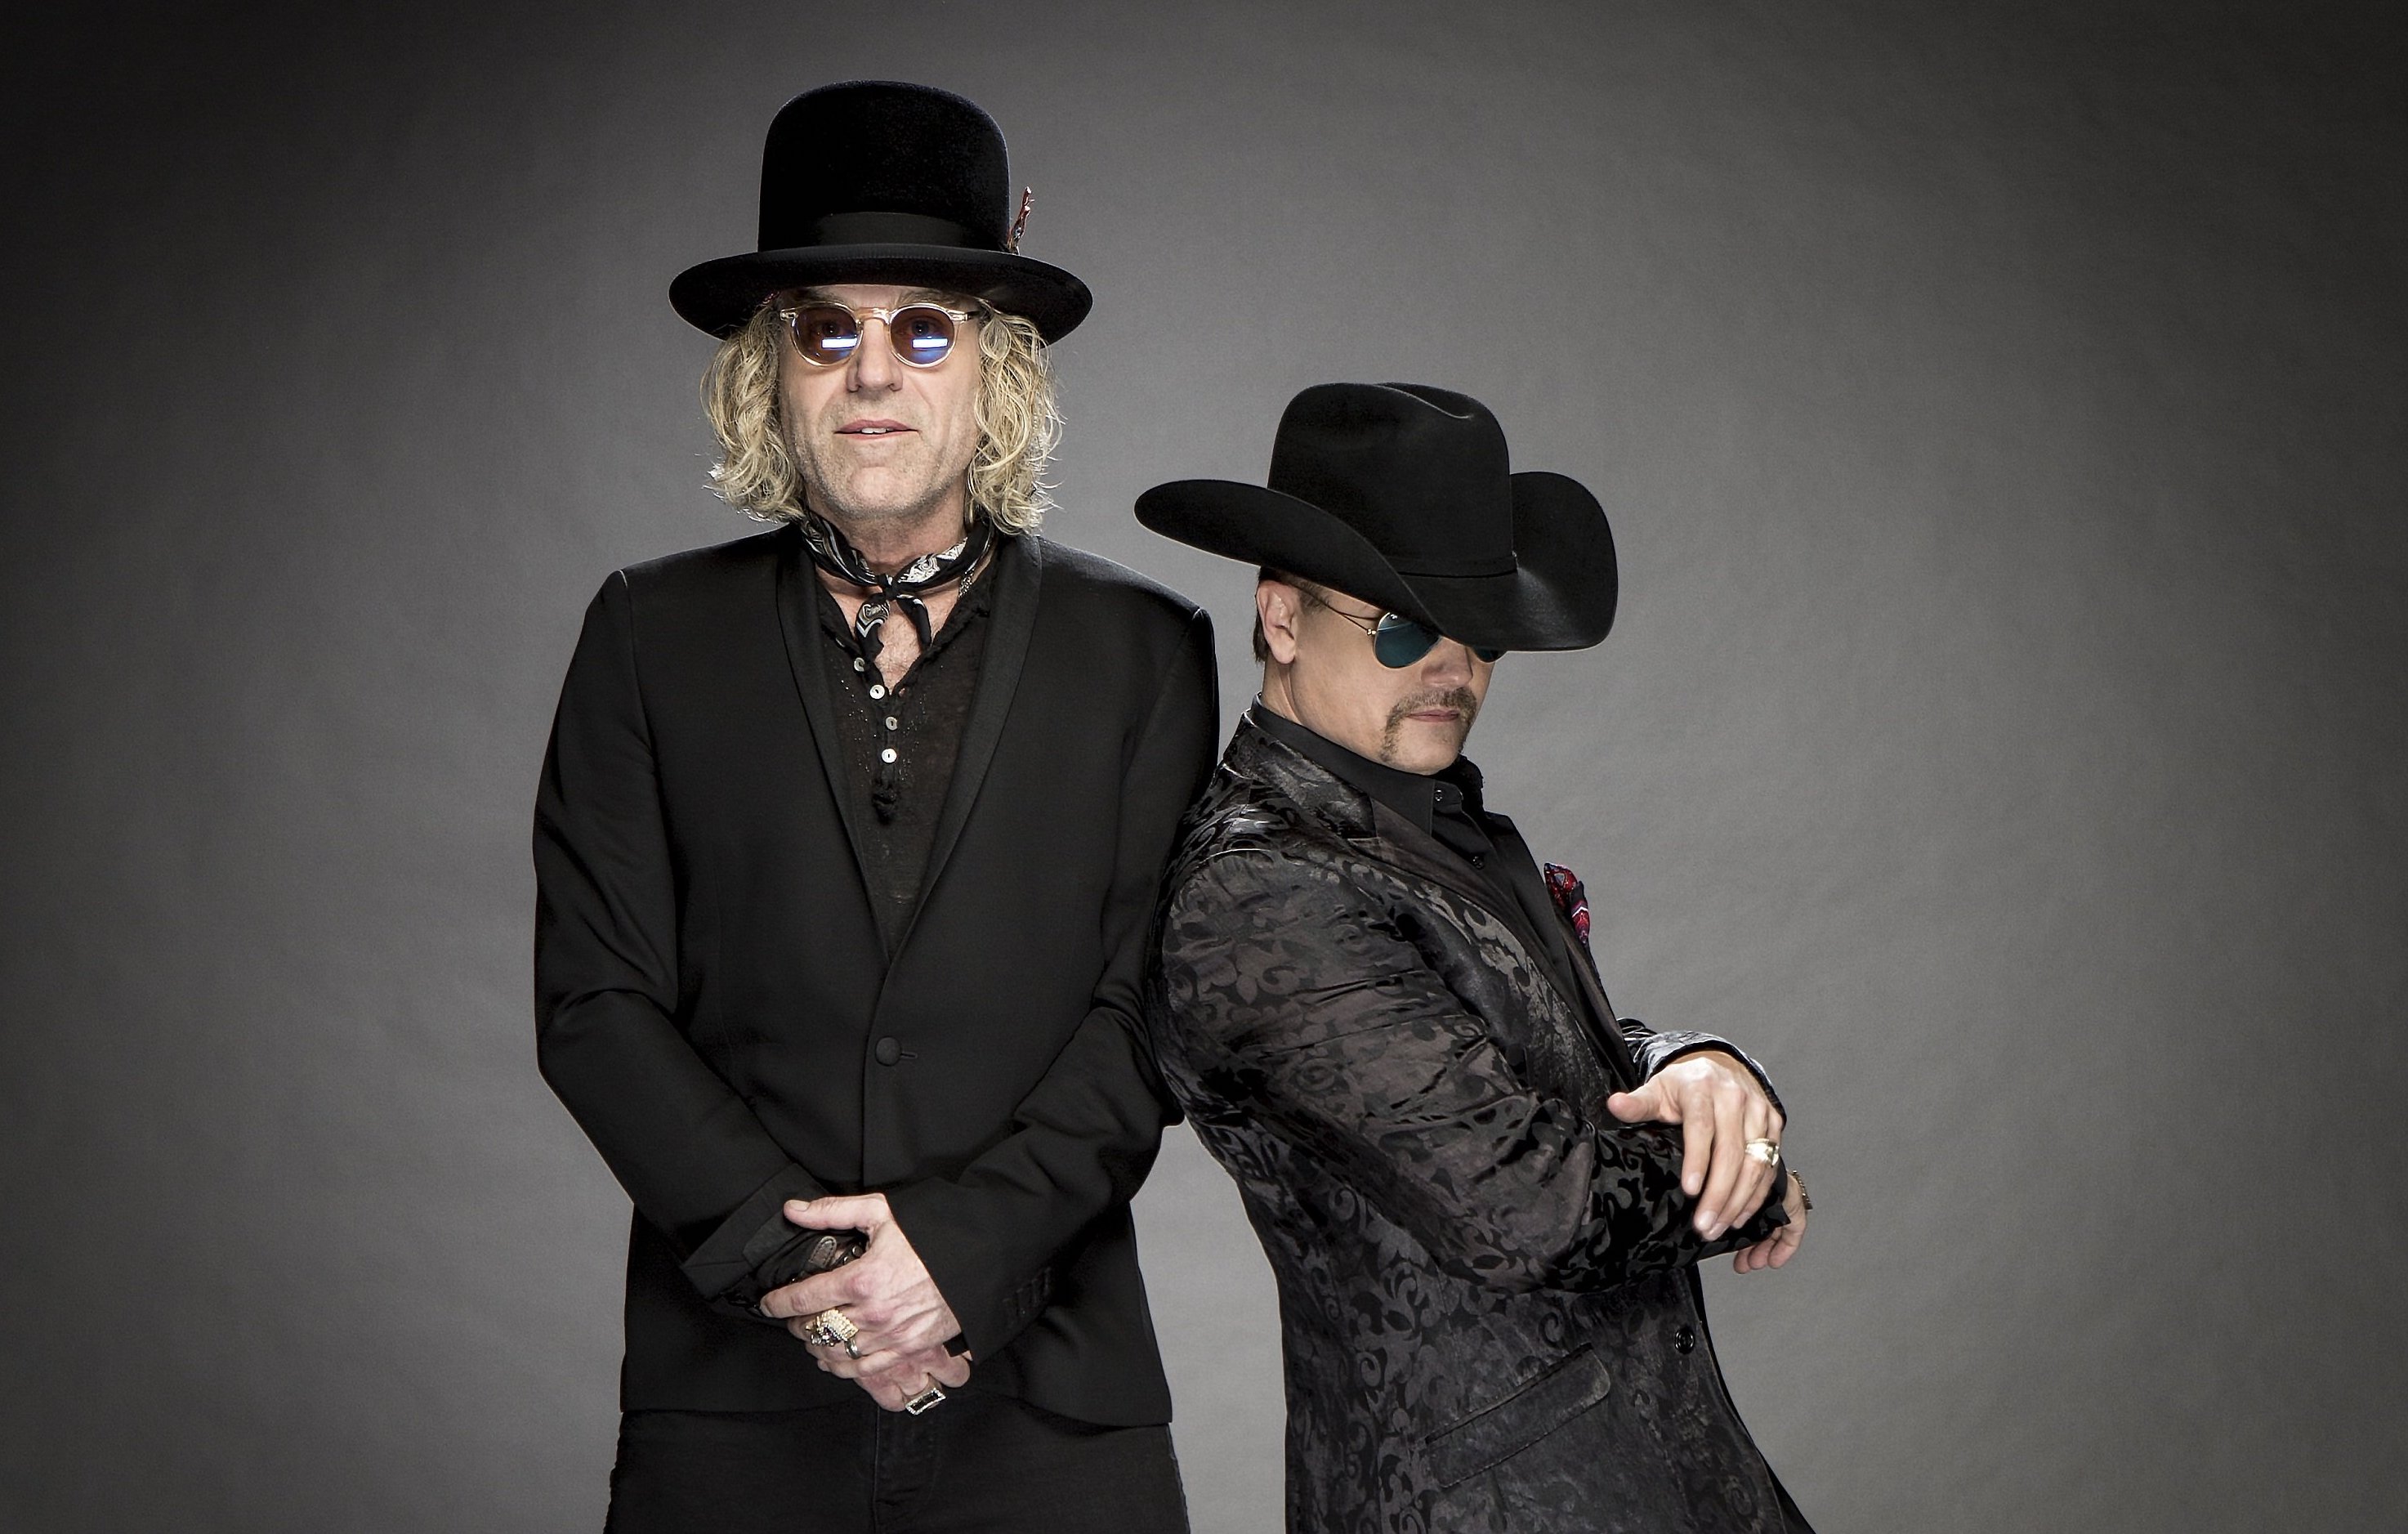 Big & Rich React to CMT Music Awards Nomination for “Duo Video of the Year”